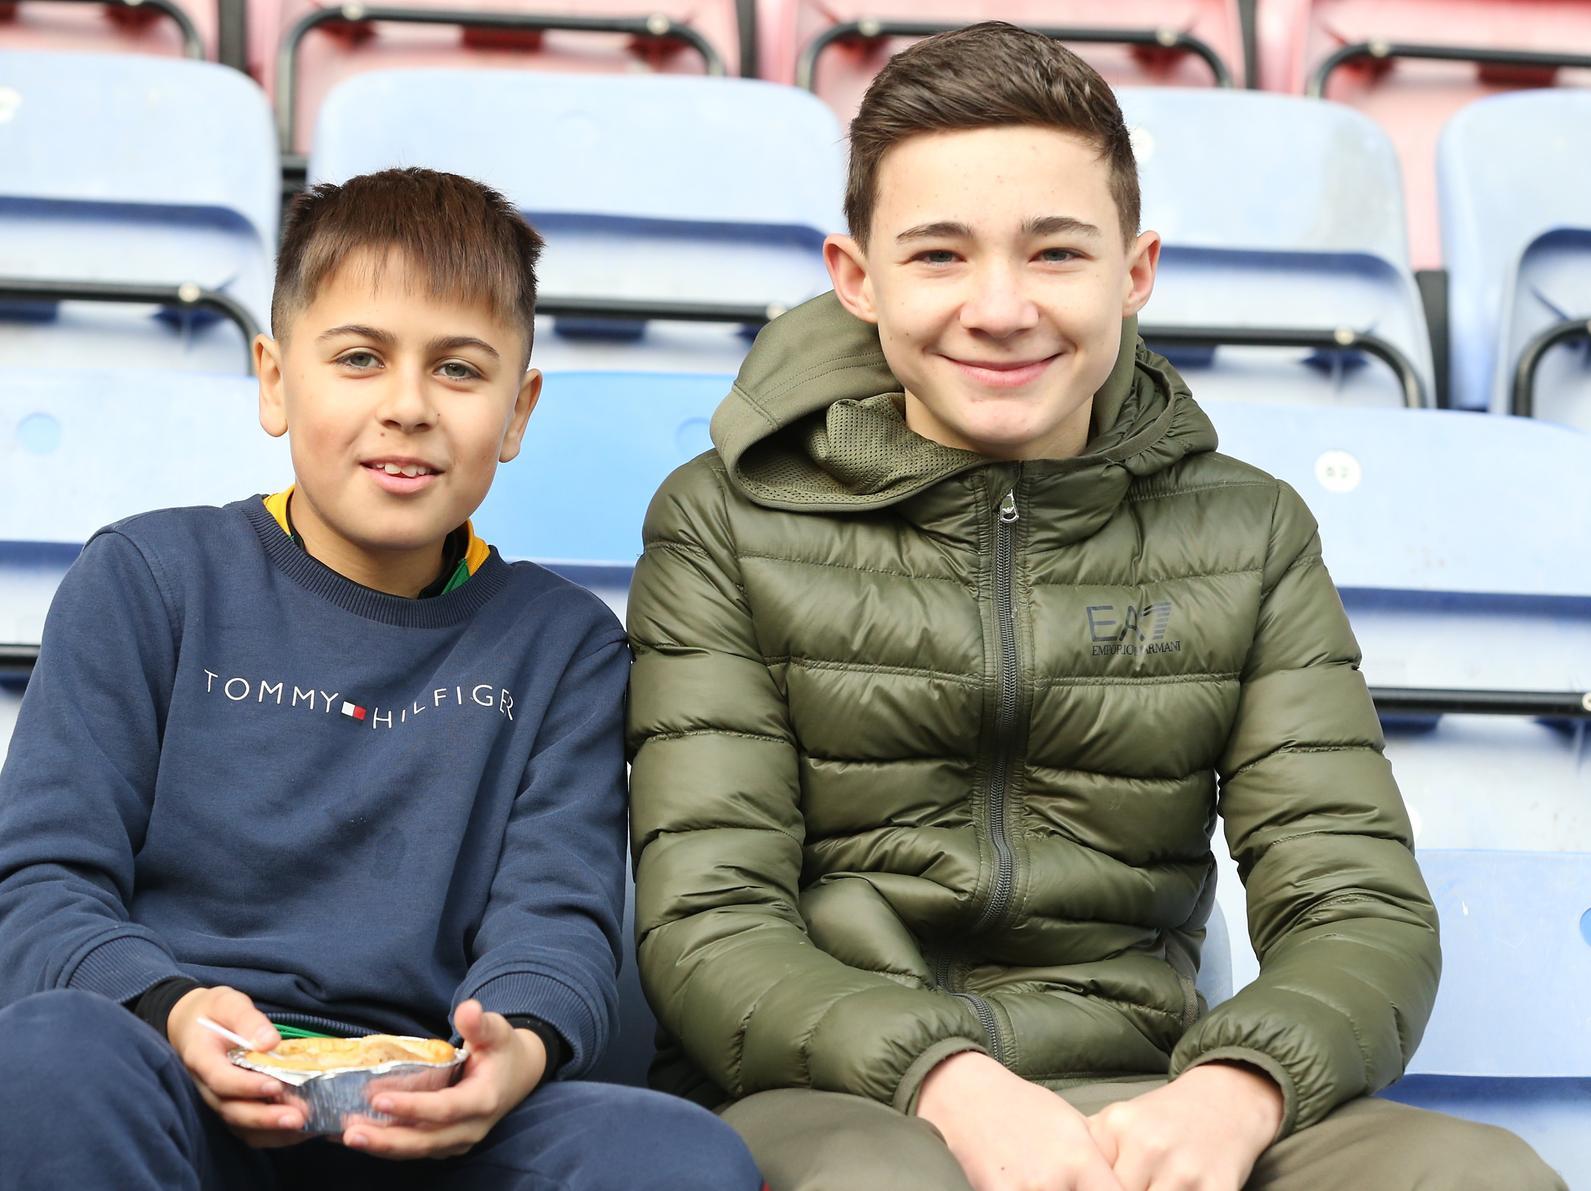 A couple of Preston fans give a smile for our camera.